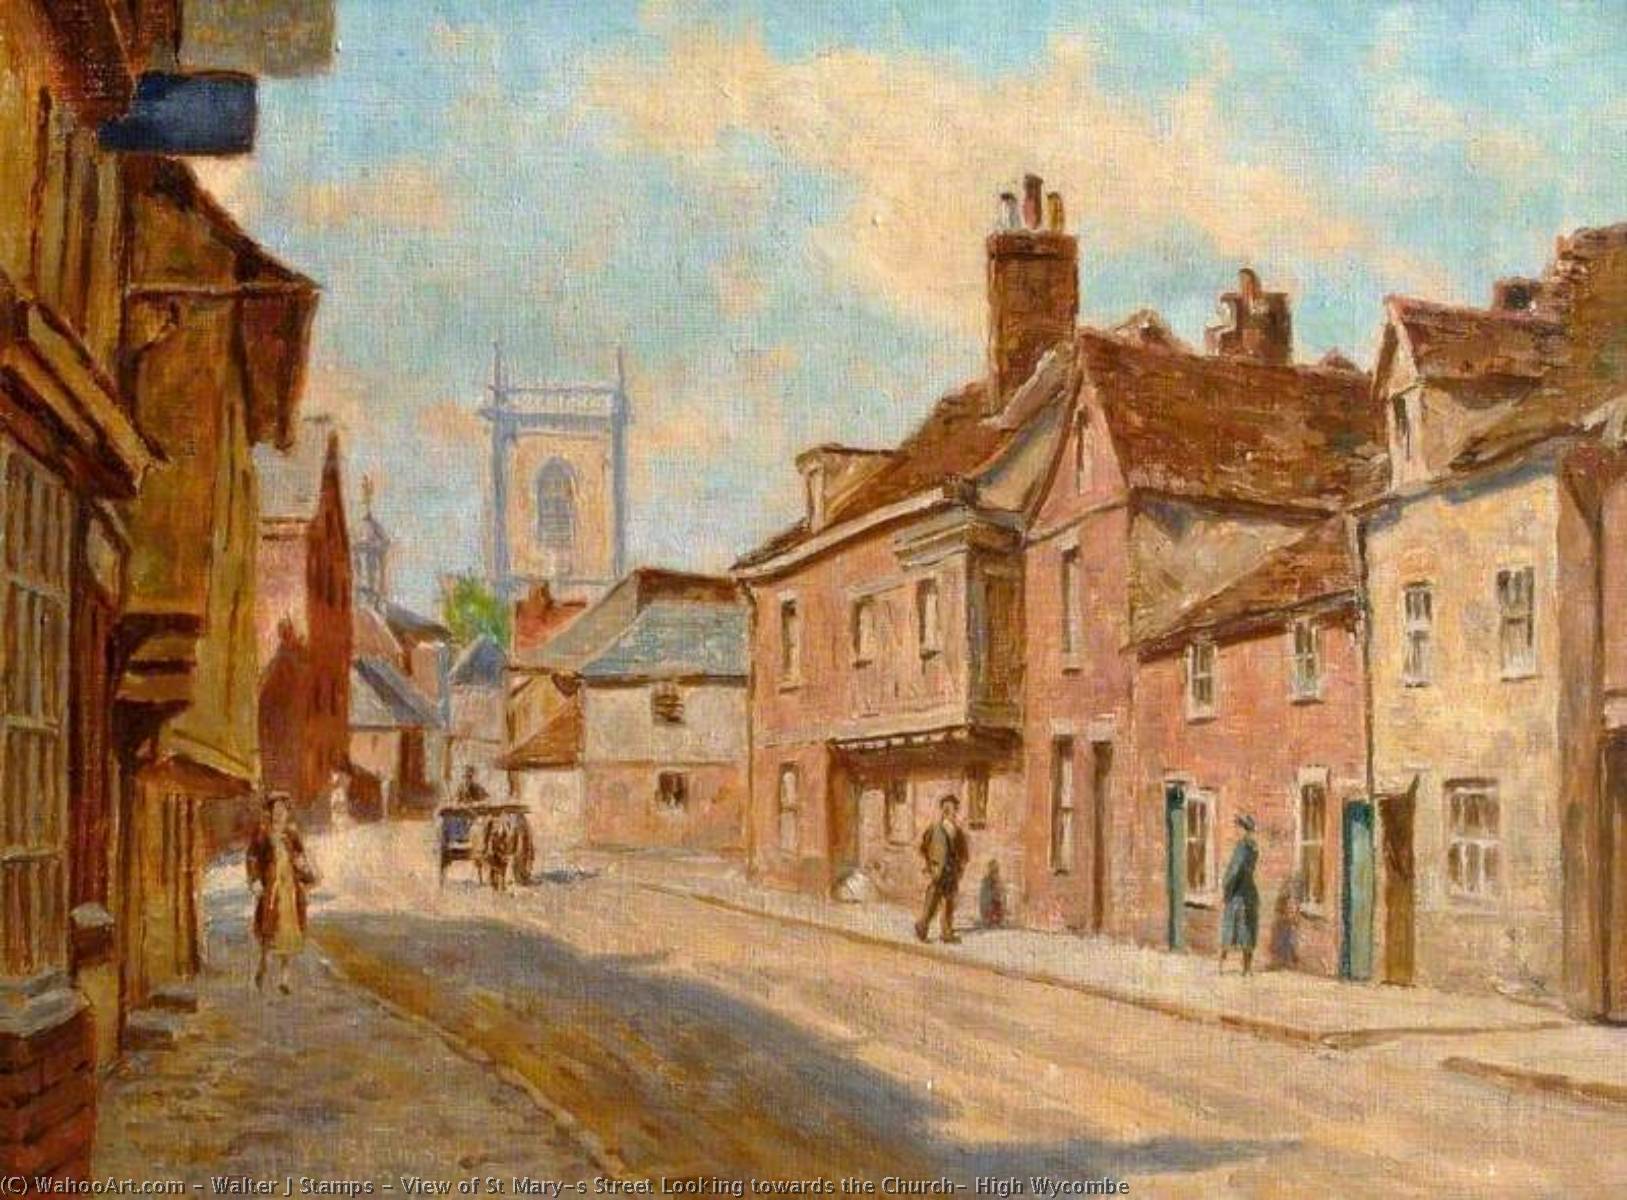 View of St Mary`s Street Looking towards the Church, High Wycombe, 1927 by Walter J Stamps Walter J Stamps | ArtsDot.com